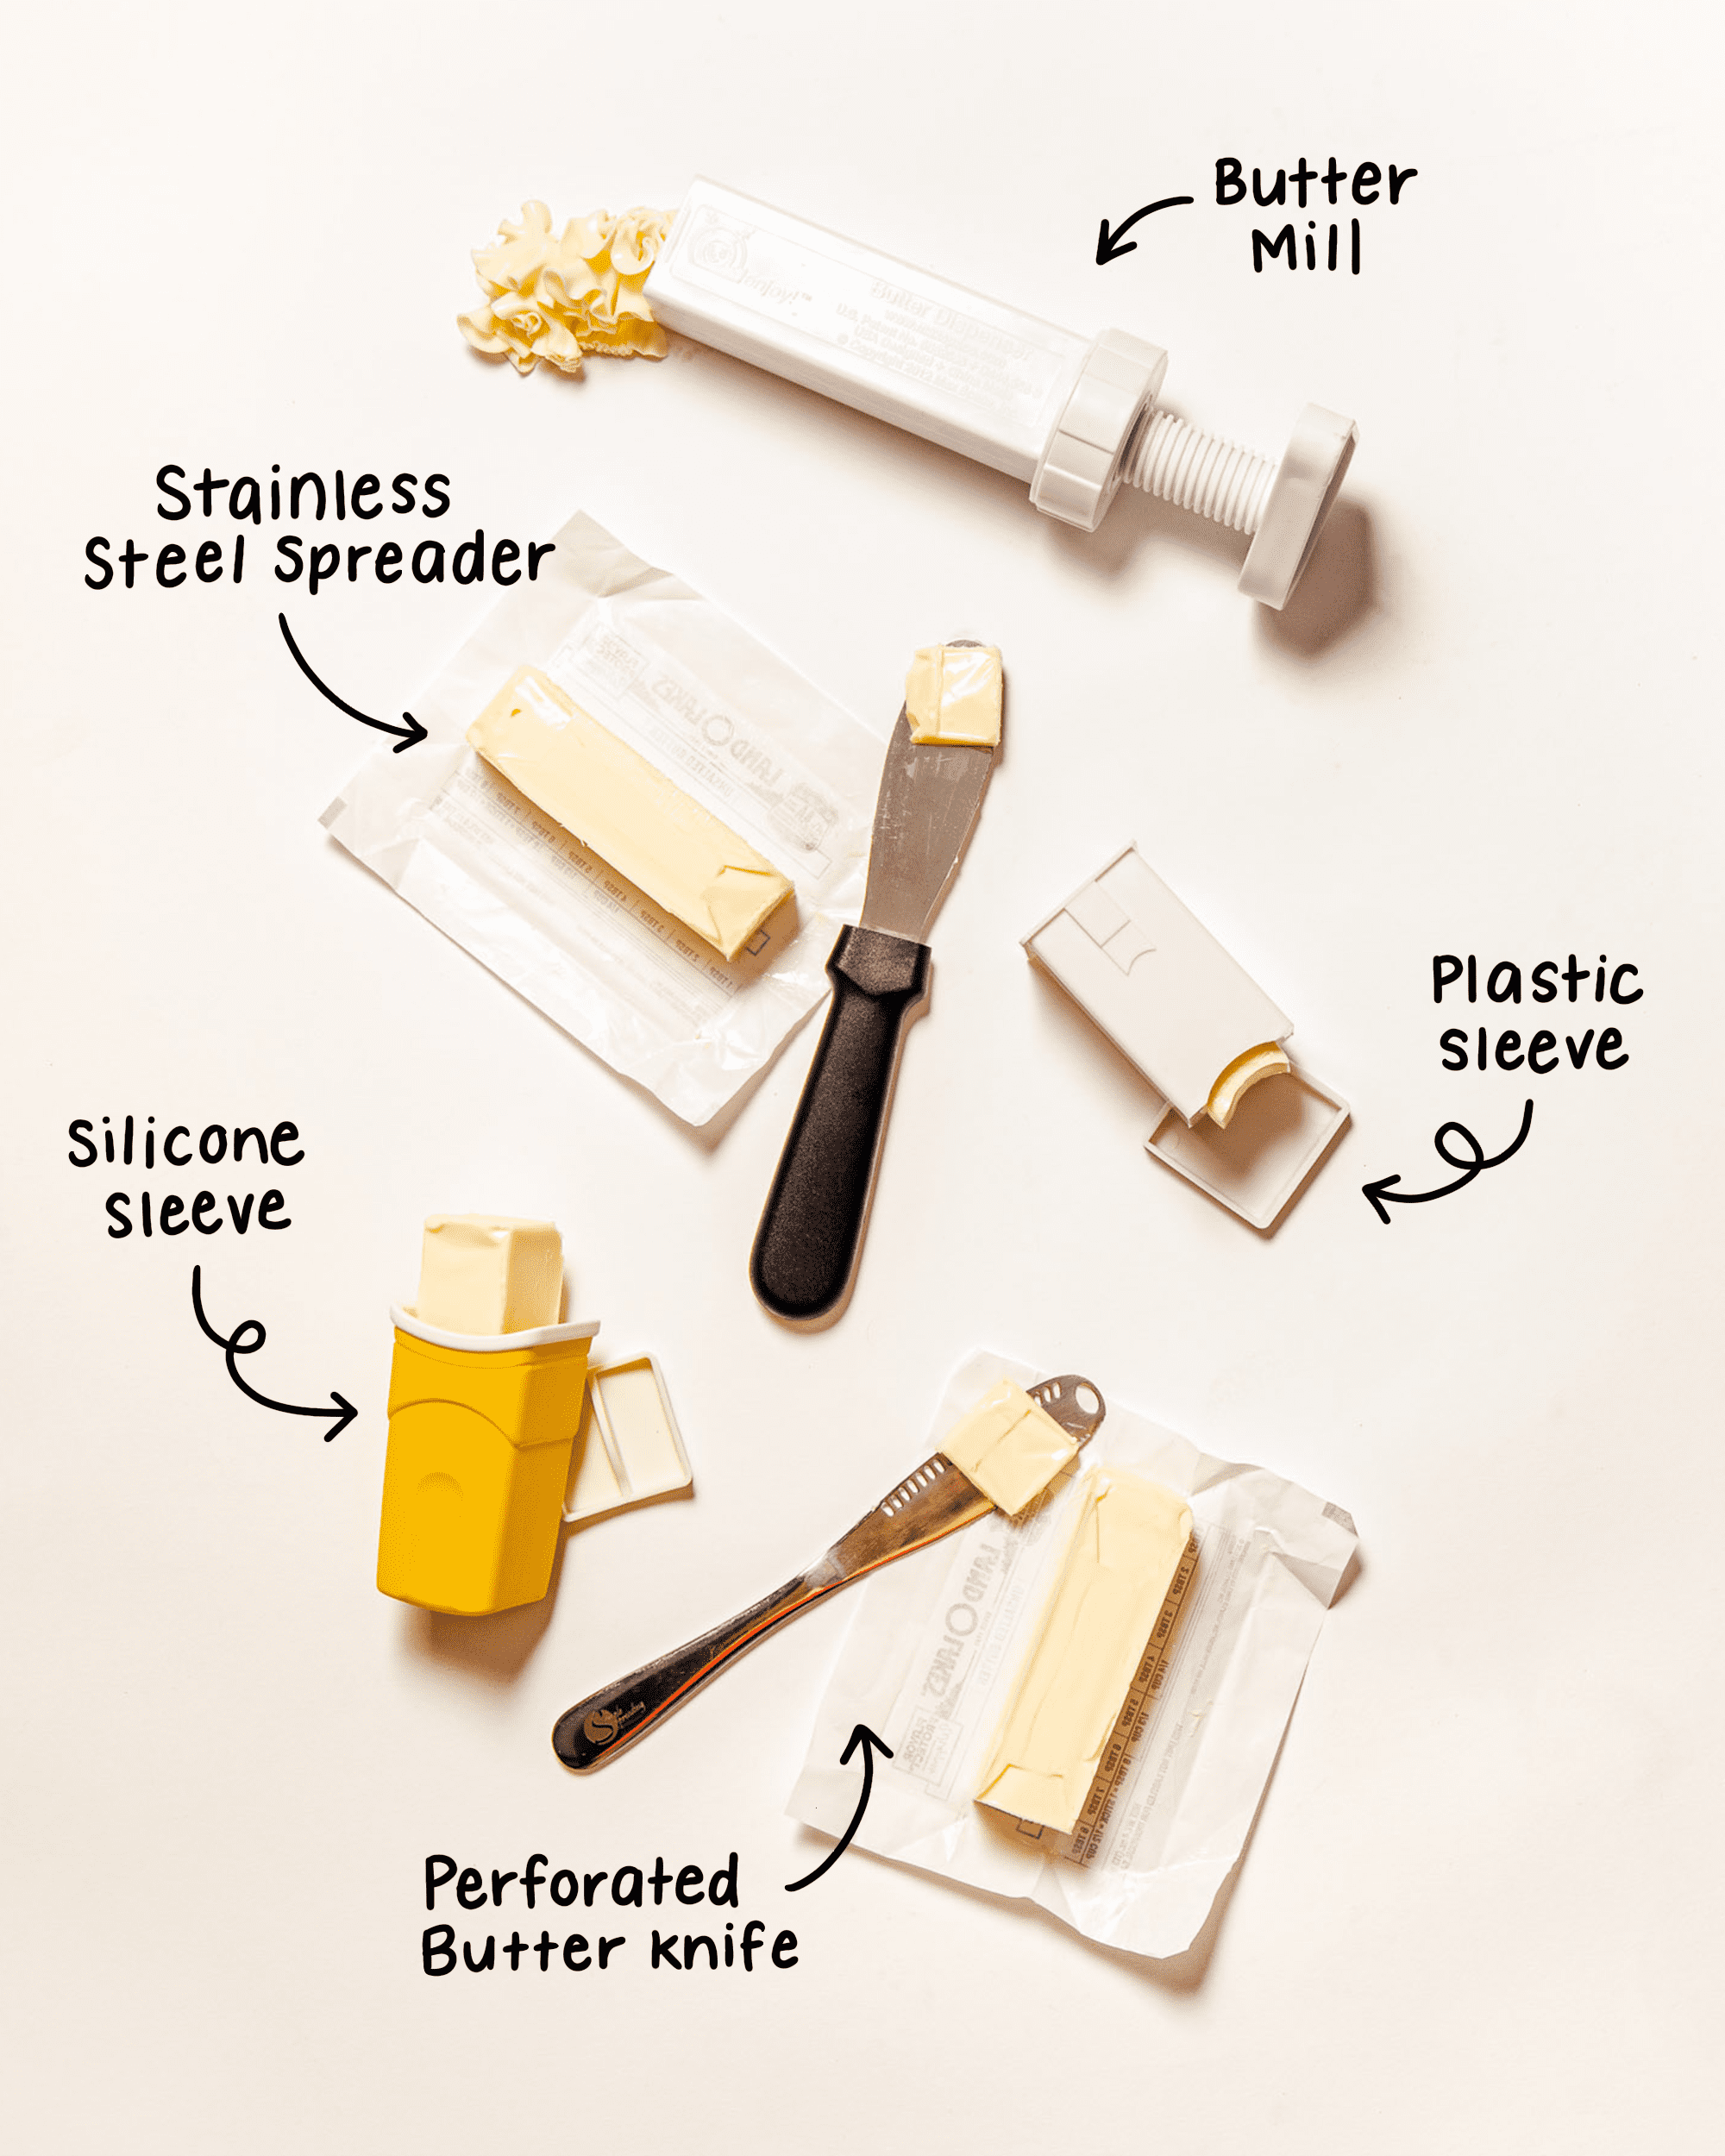 Better Butter Spreader Knife – Neat and Handy